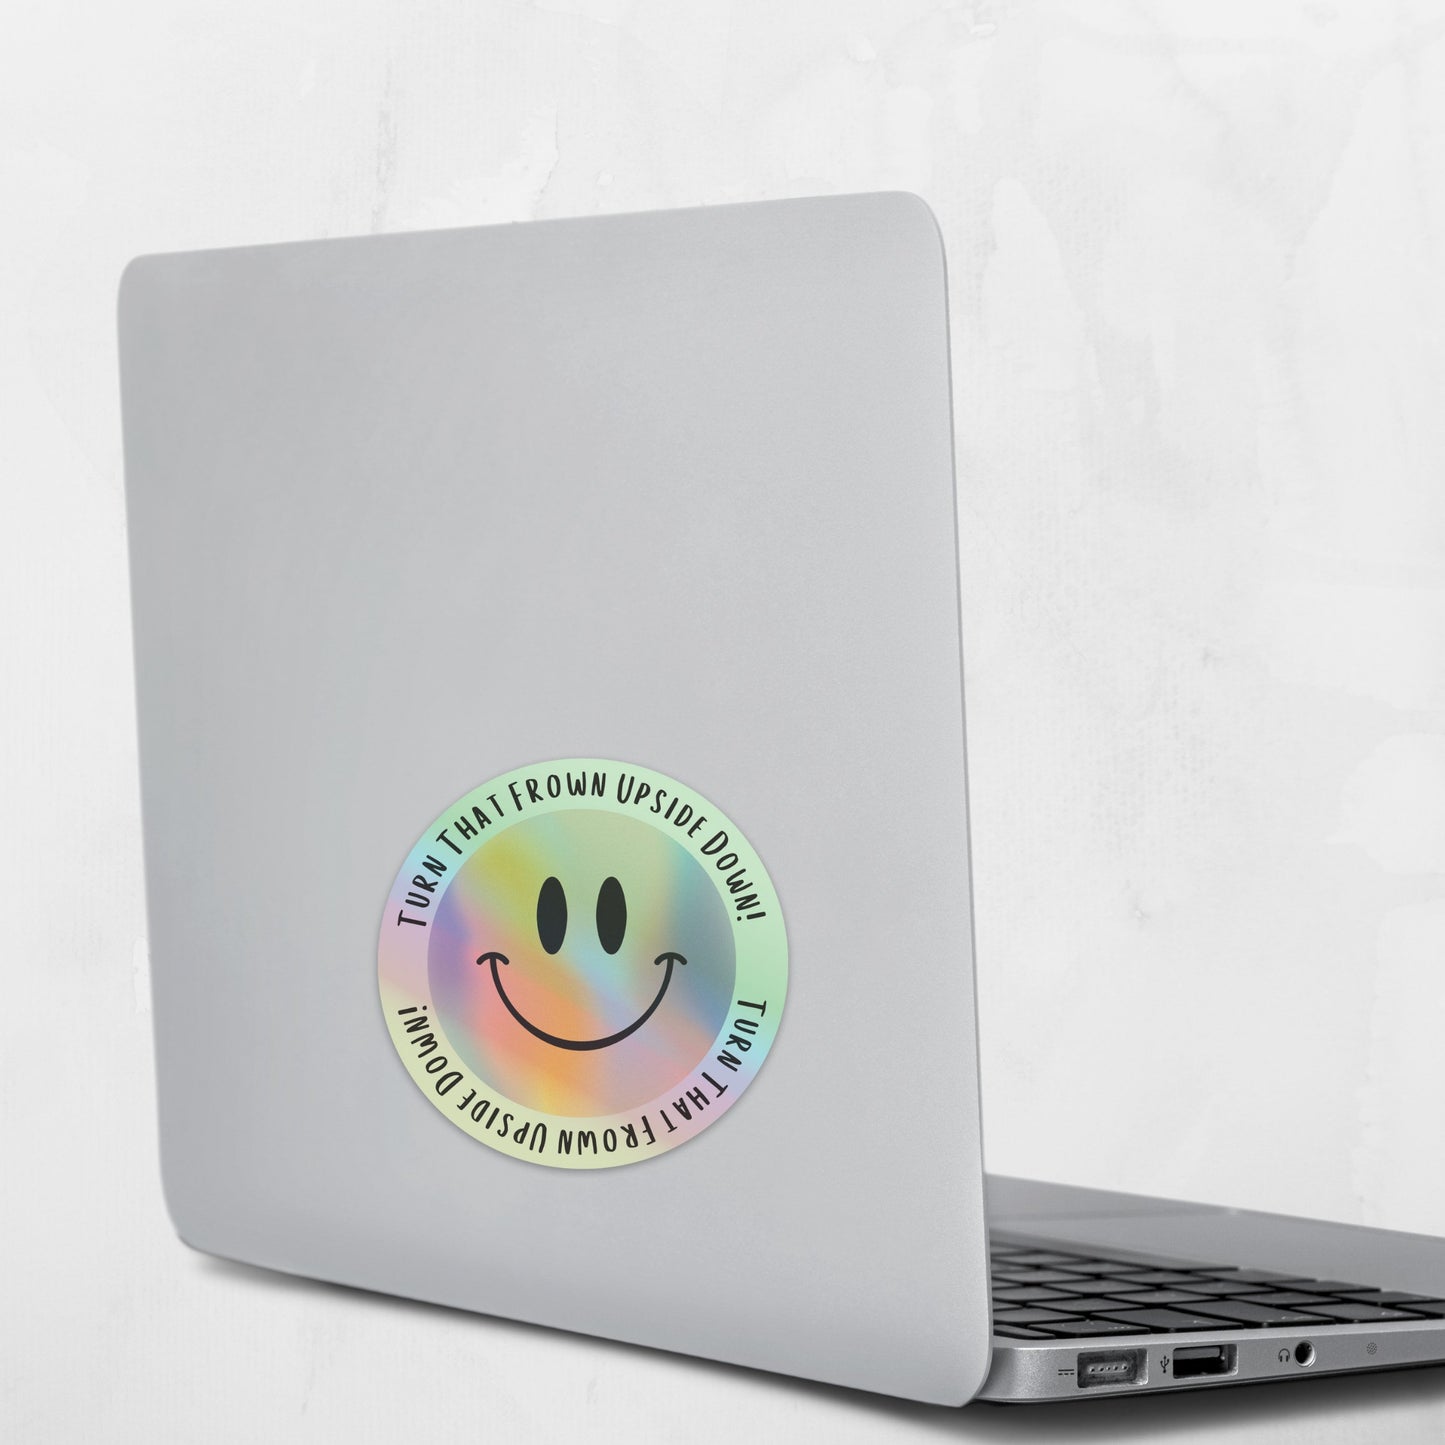 Turn that Frown Upside Down Holographic Vinyl Sticker